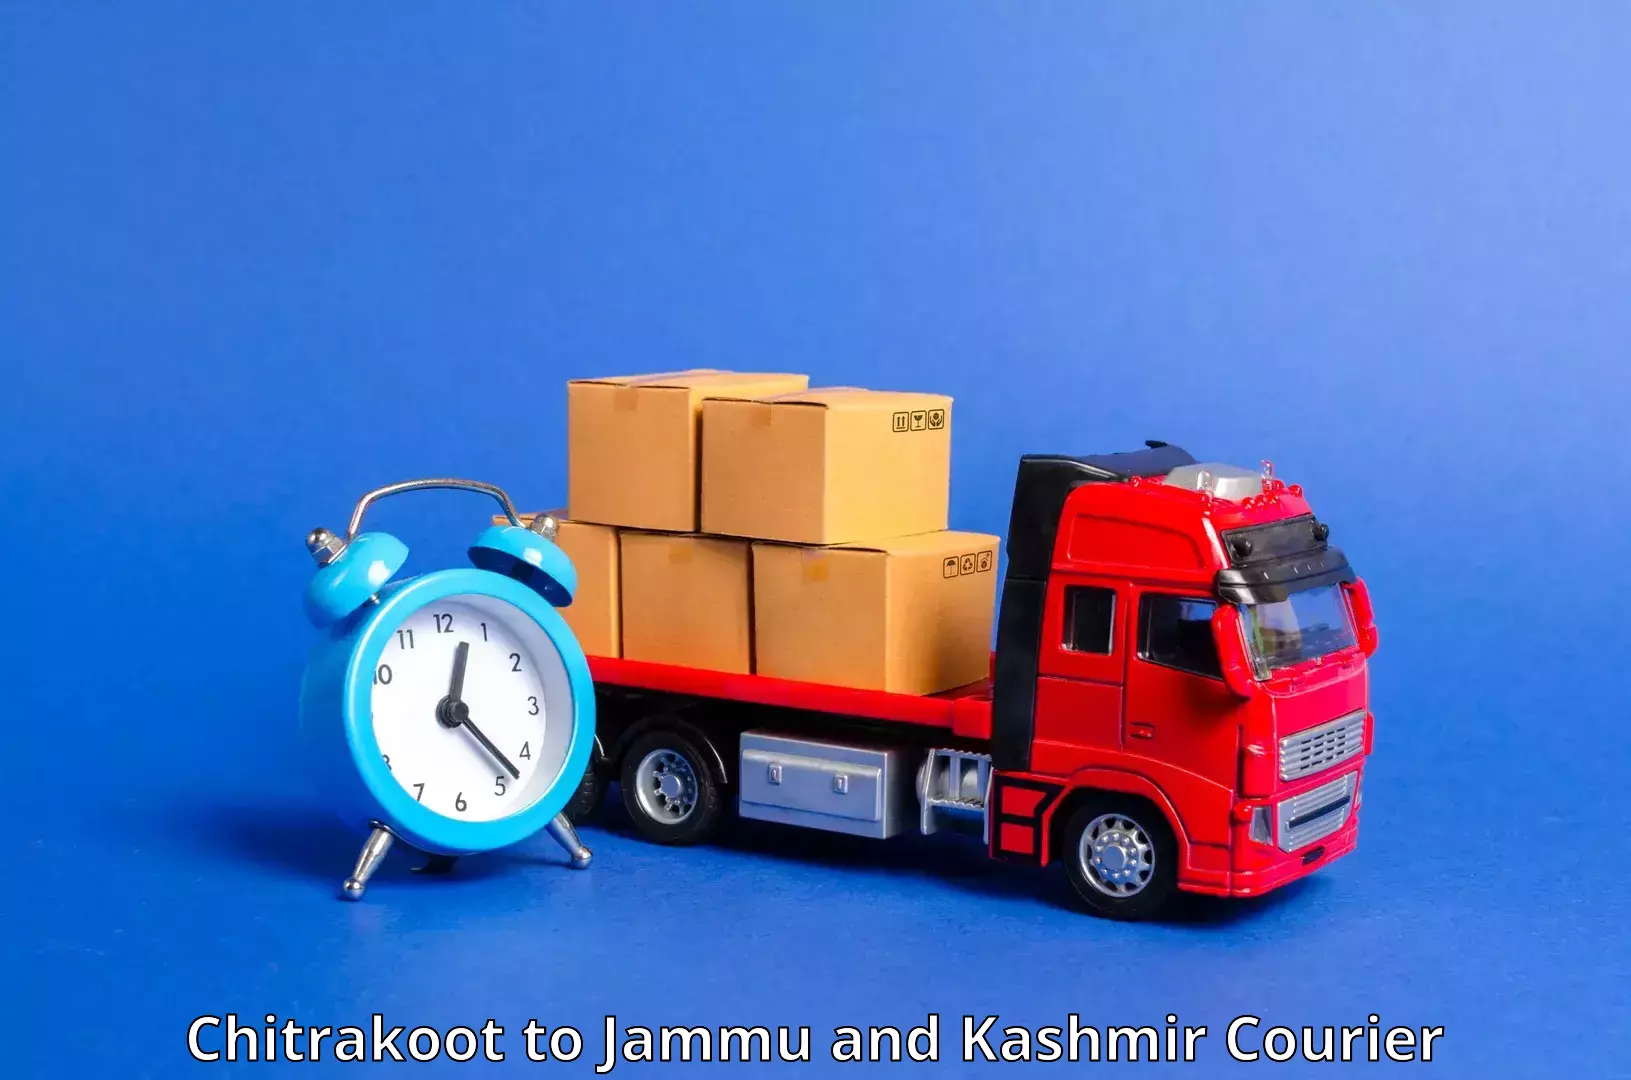 24/7 courier service in Chitrakoot to Bhaderwah